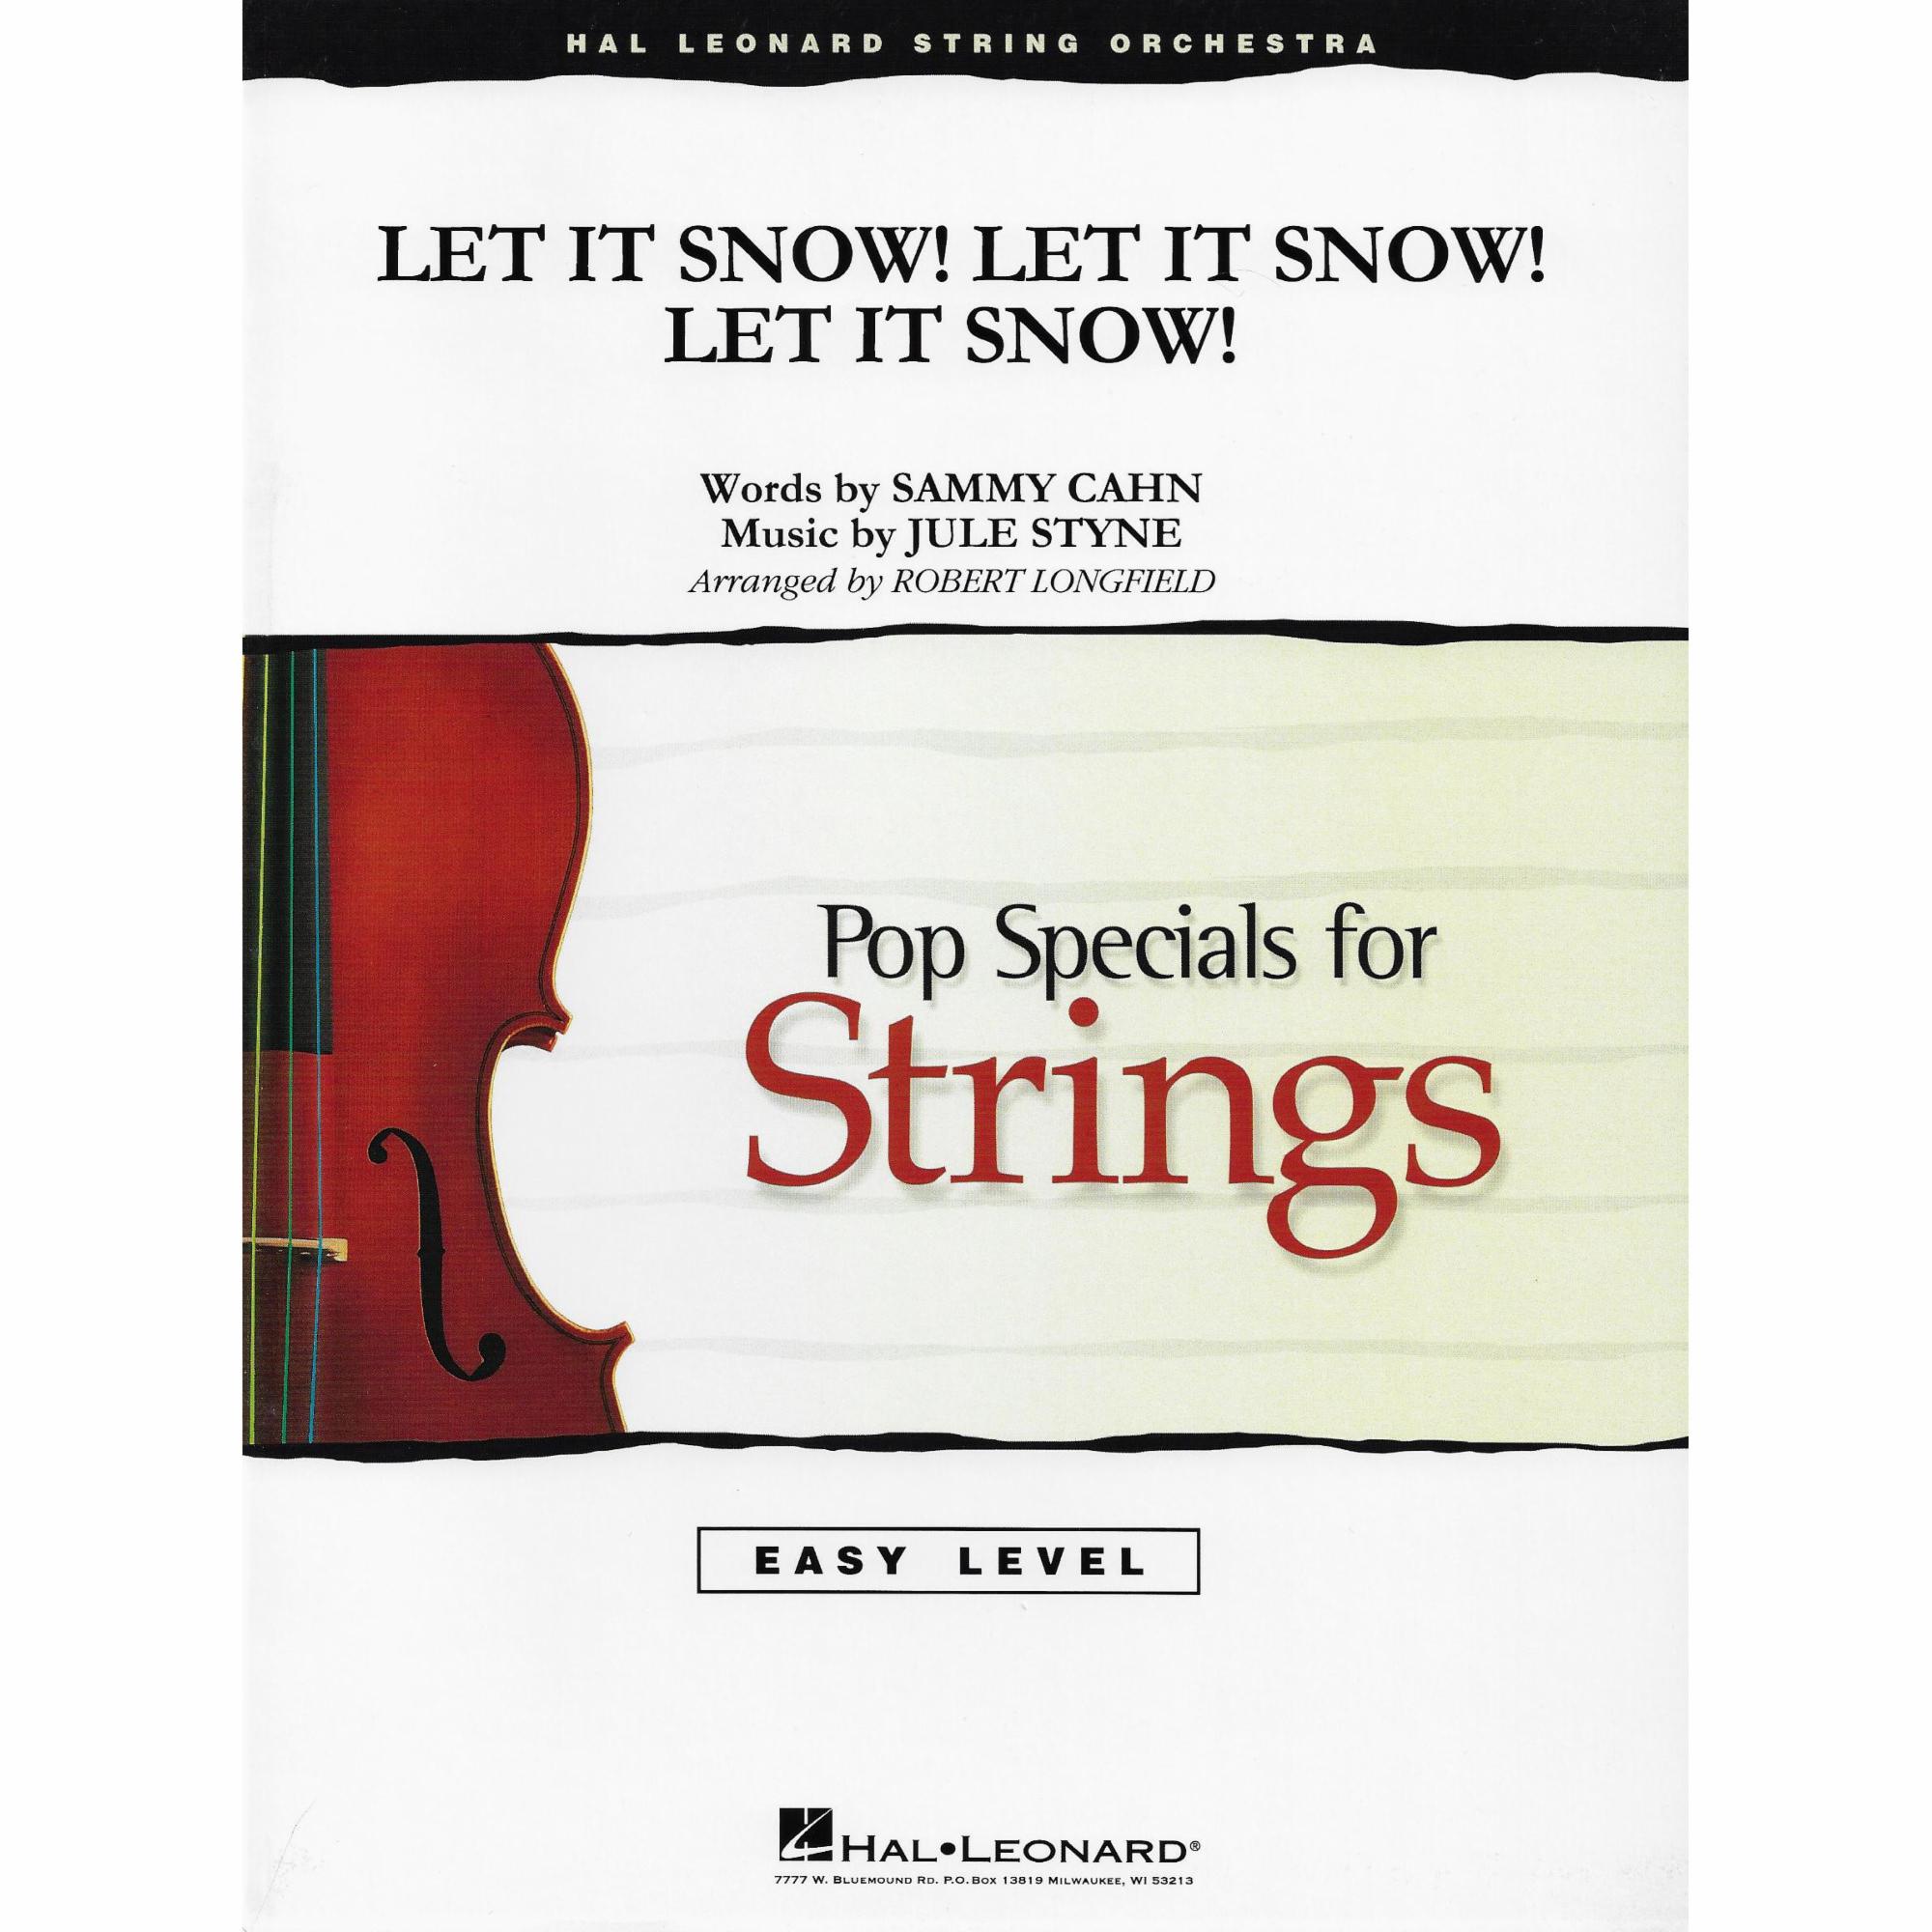 Let It Snow! for String Orchestra